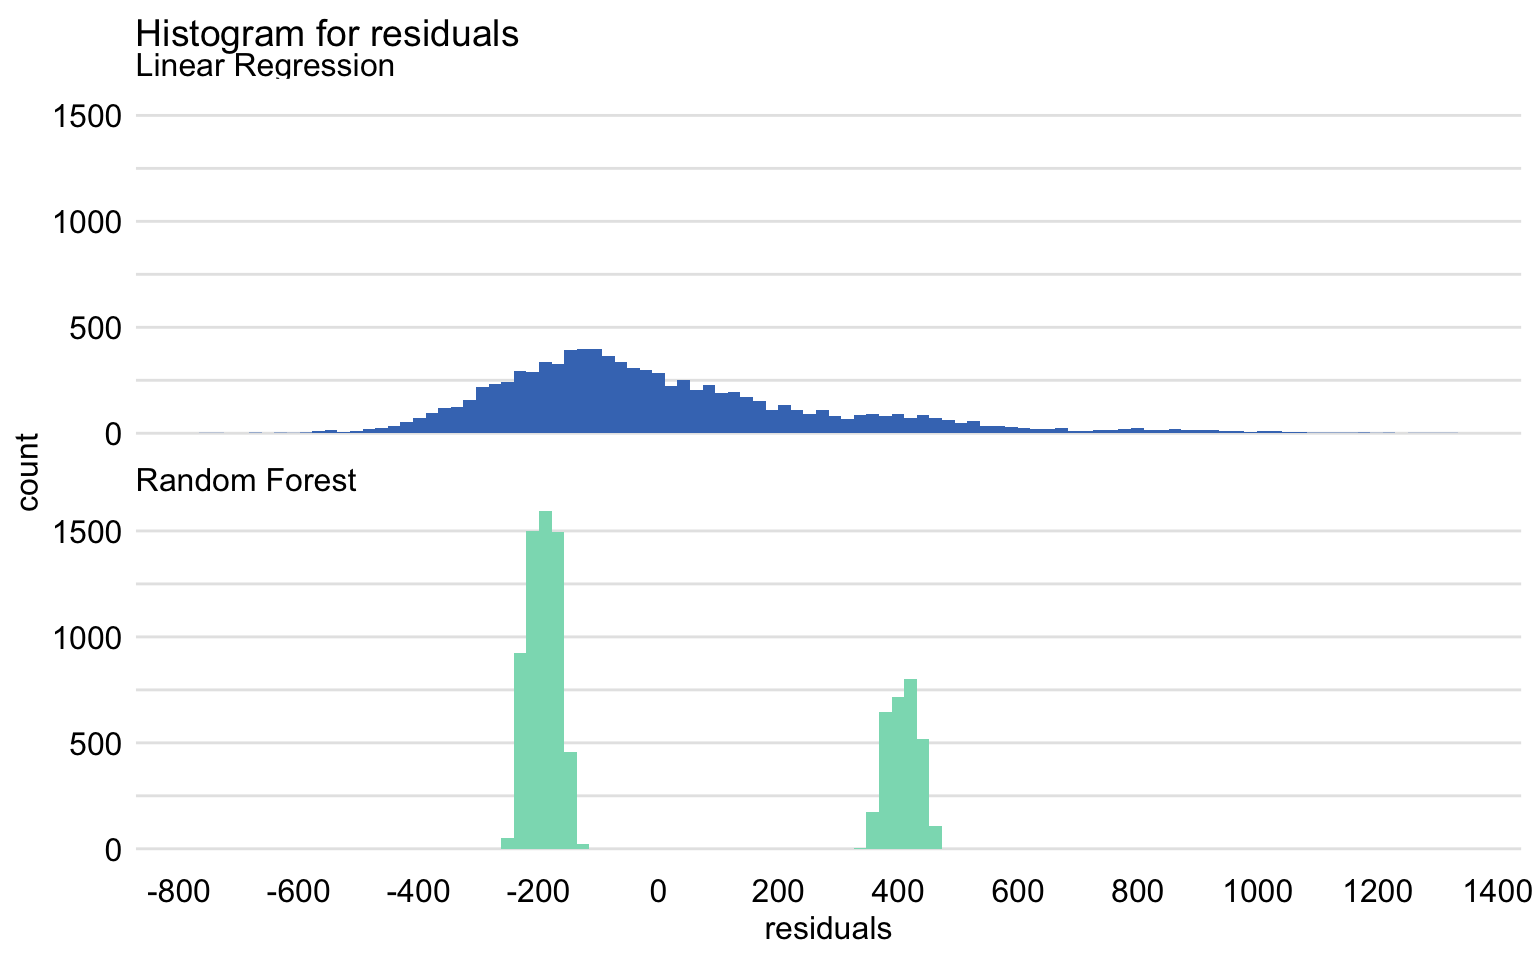 Histogram of residuals for the linear-regression model apartments_lm and the random forest model apartments_rf for the apartments_test dataset.